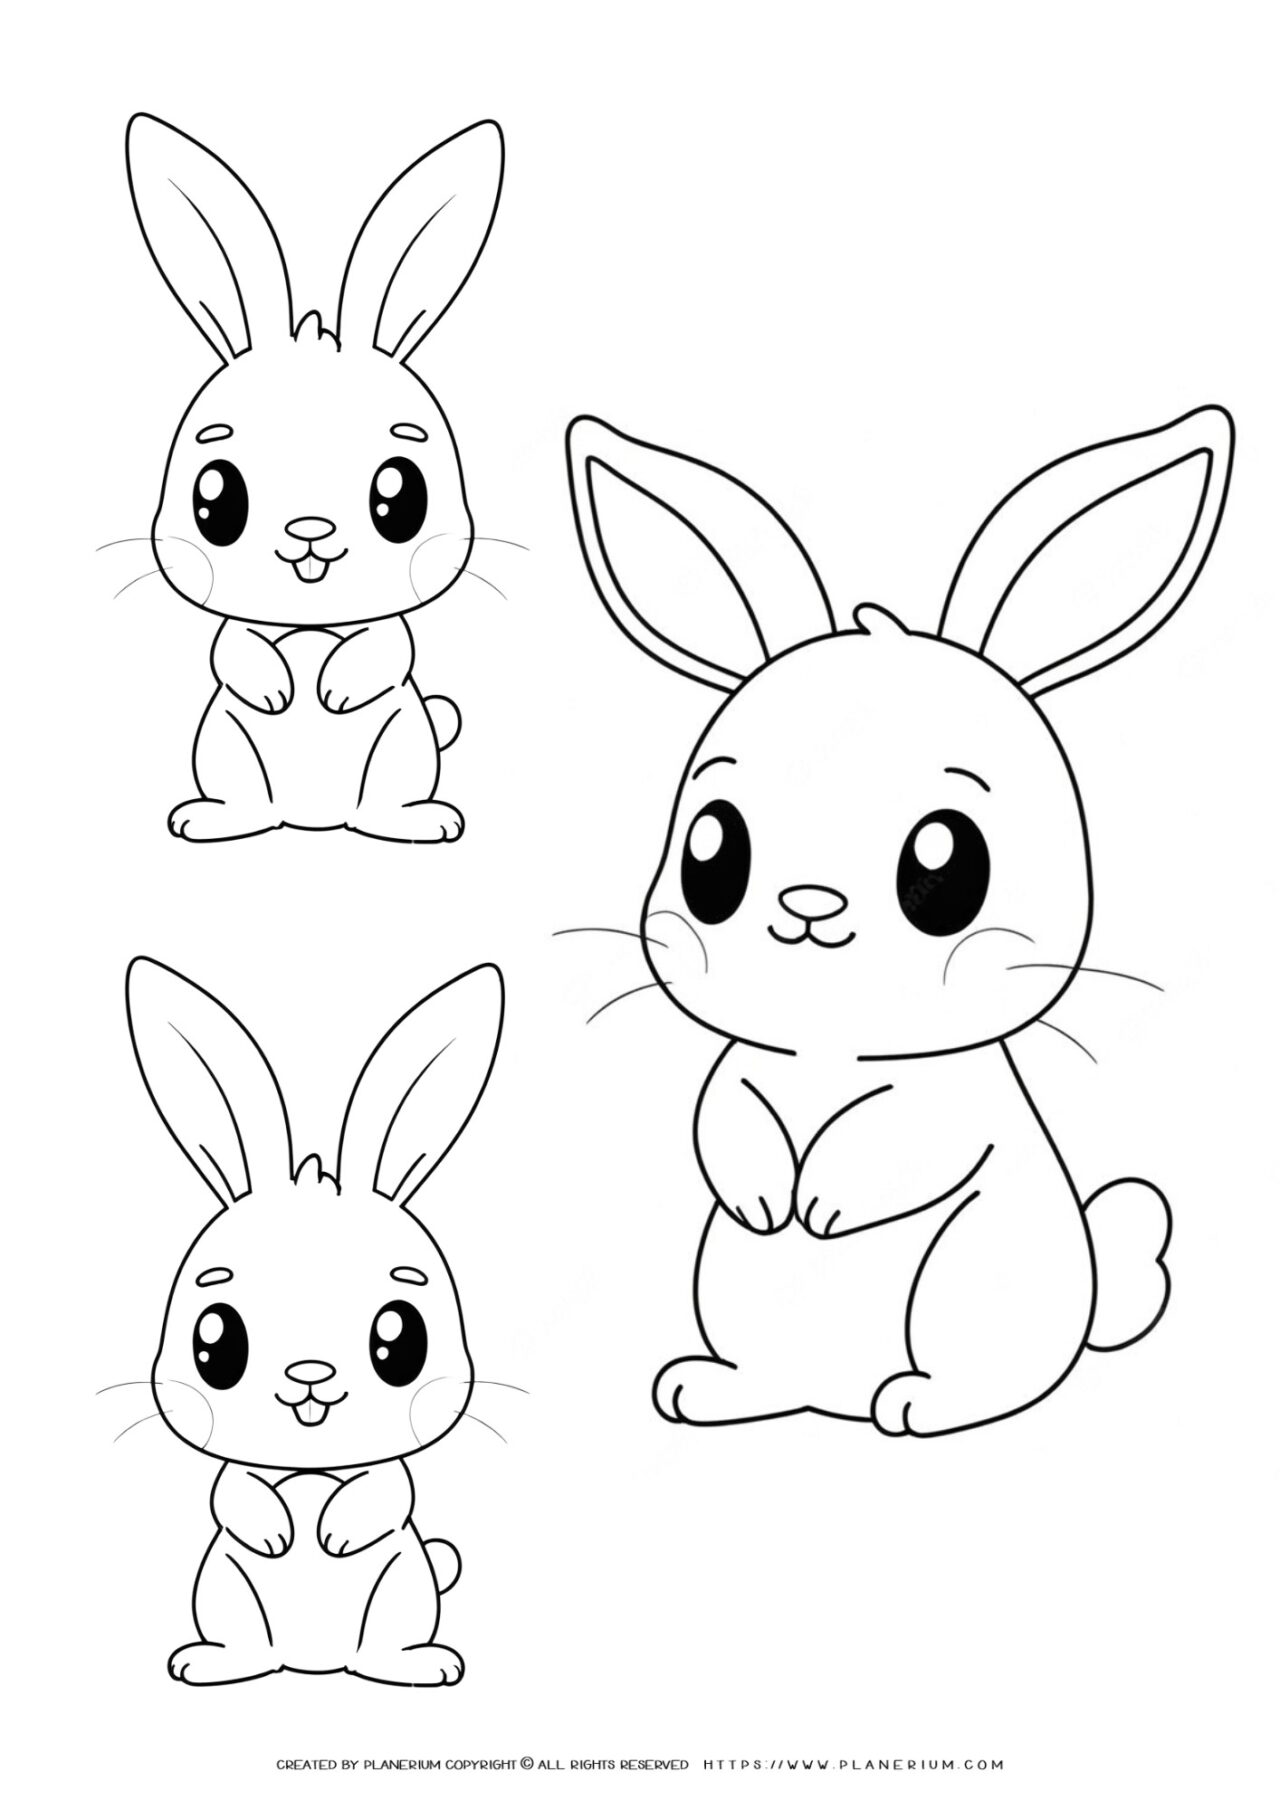 cut-bunny-outlines